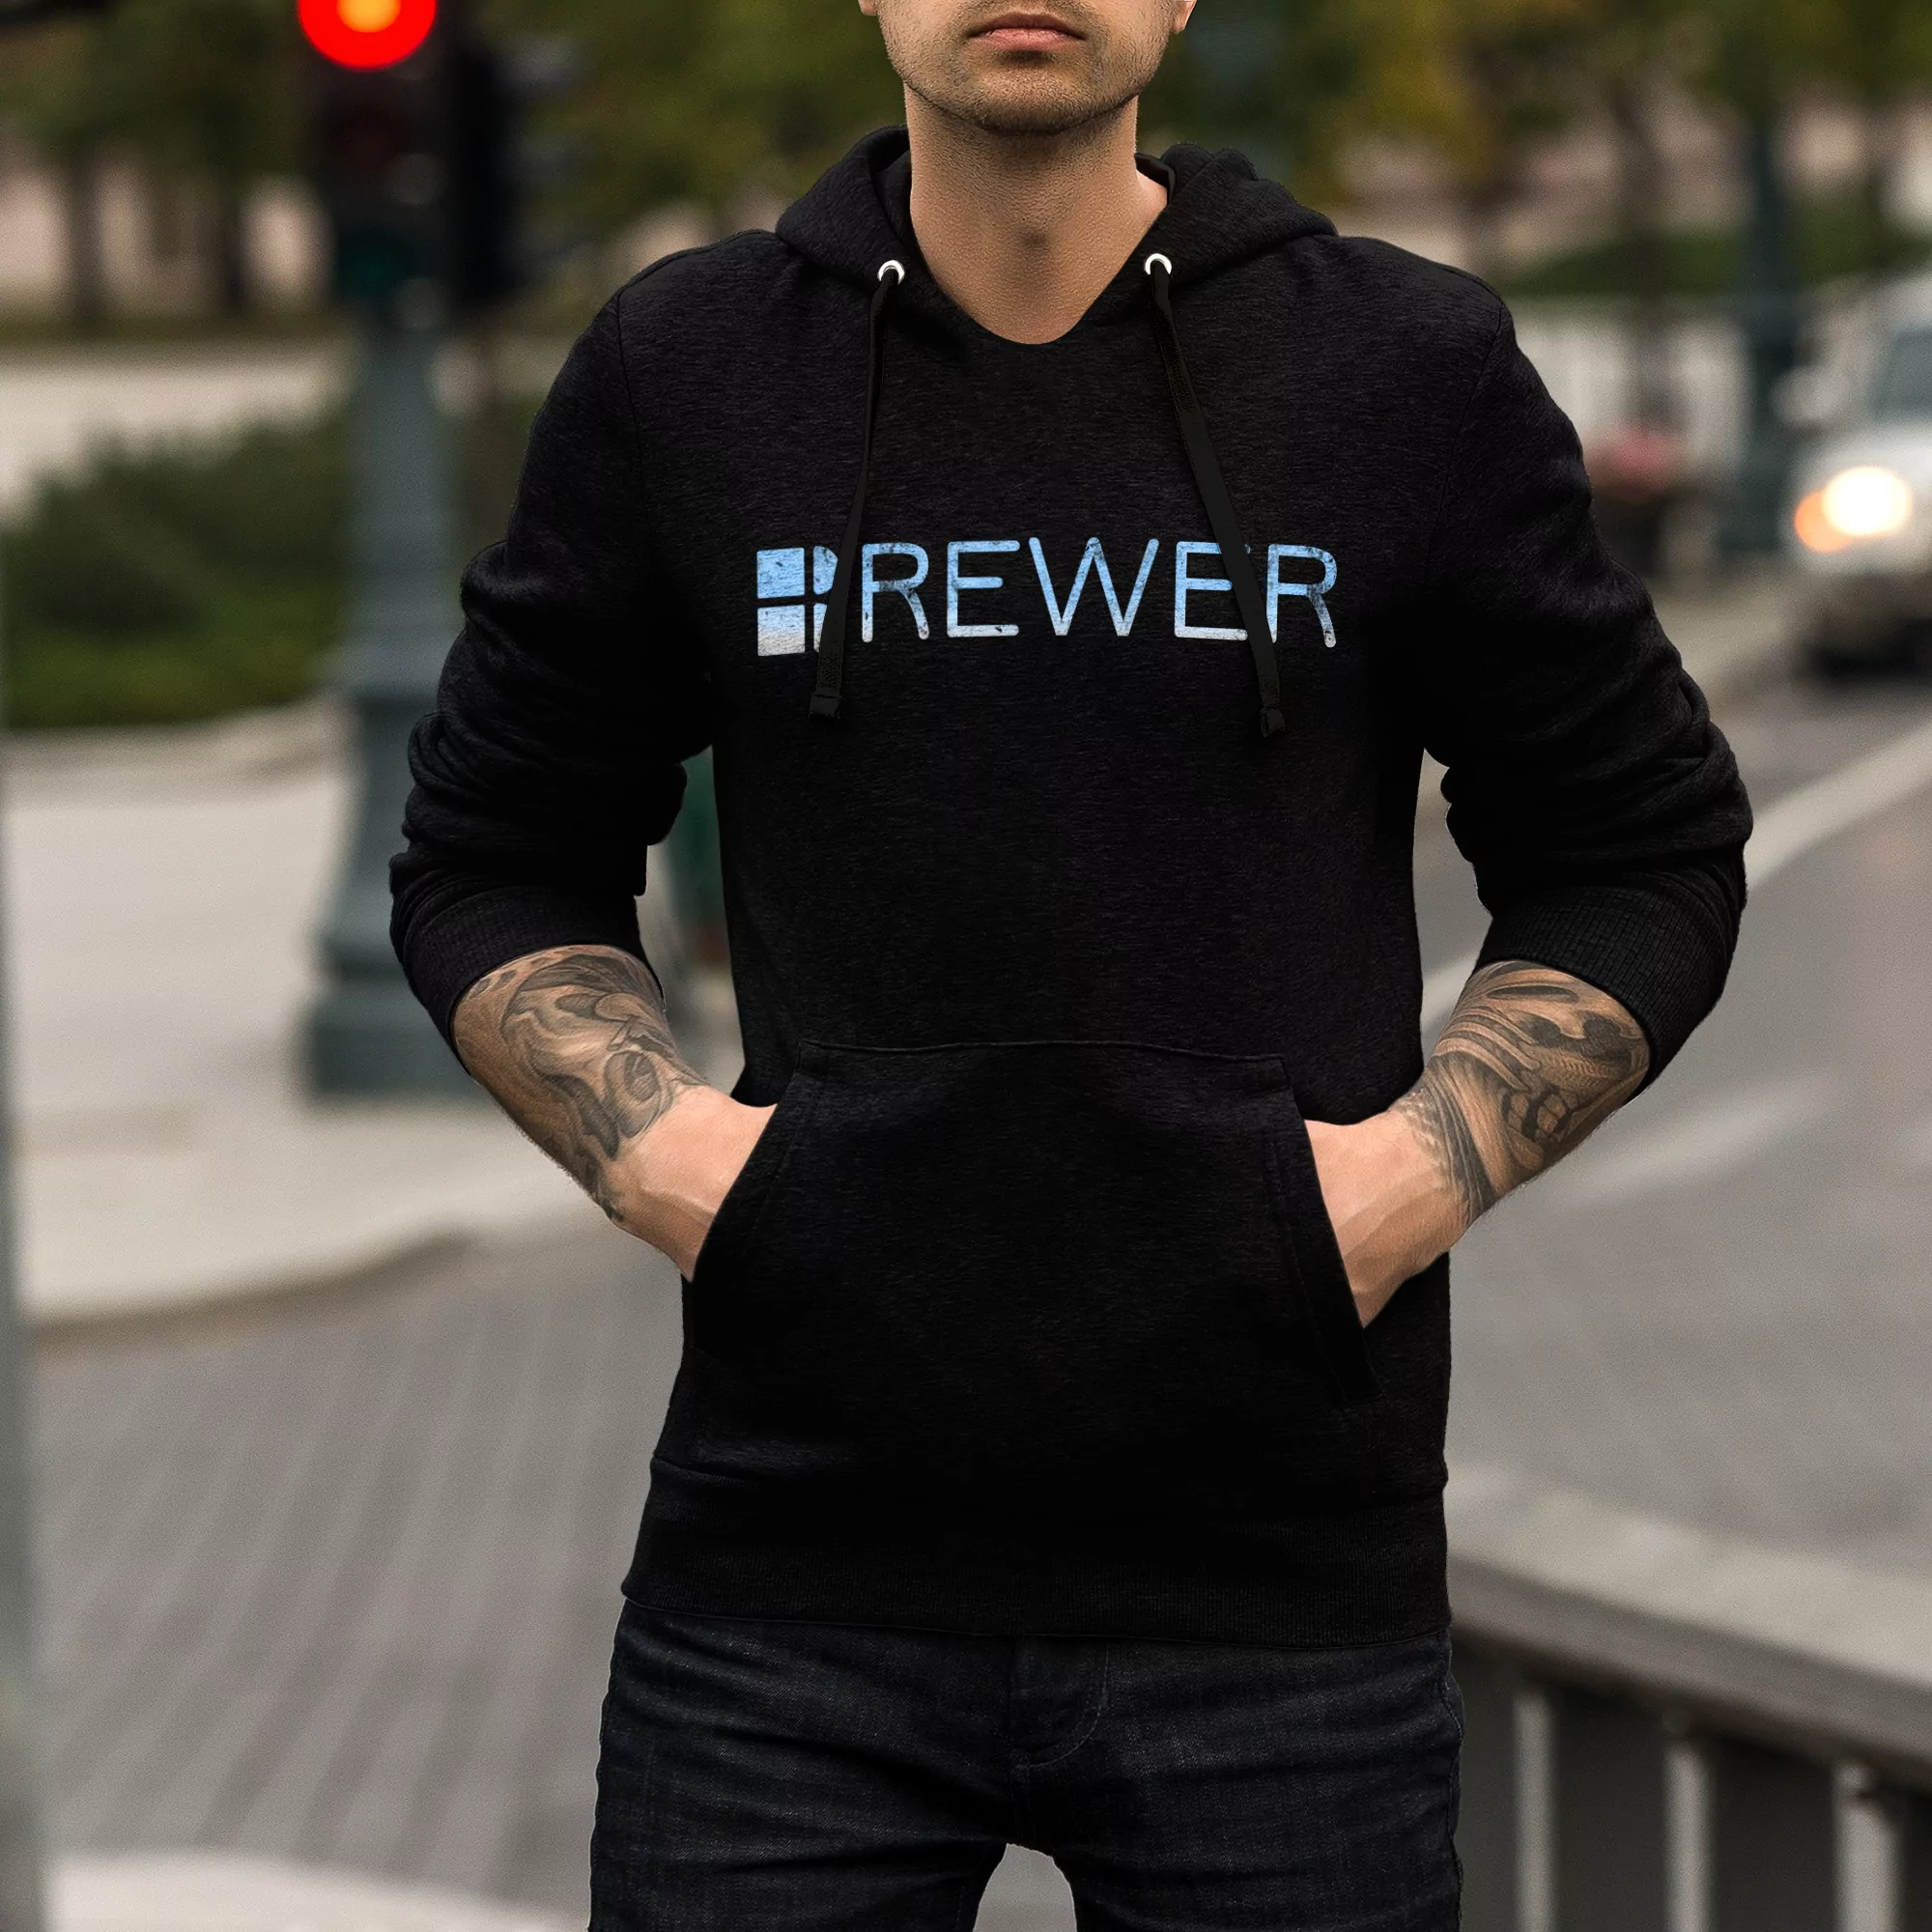 Man wearing black Brewer Pullover Hoodie with street in background